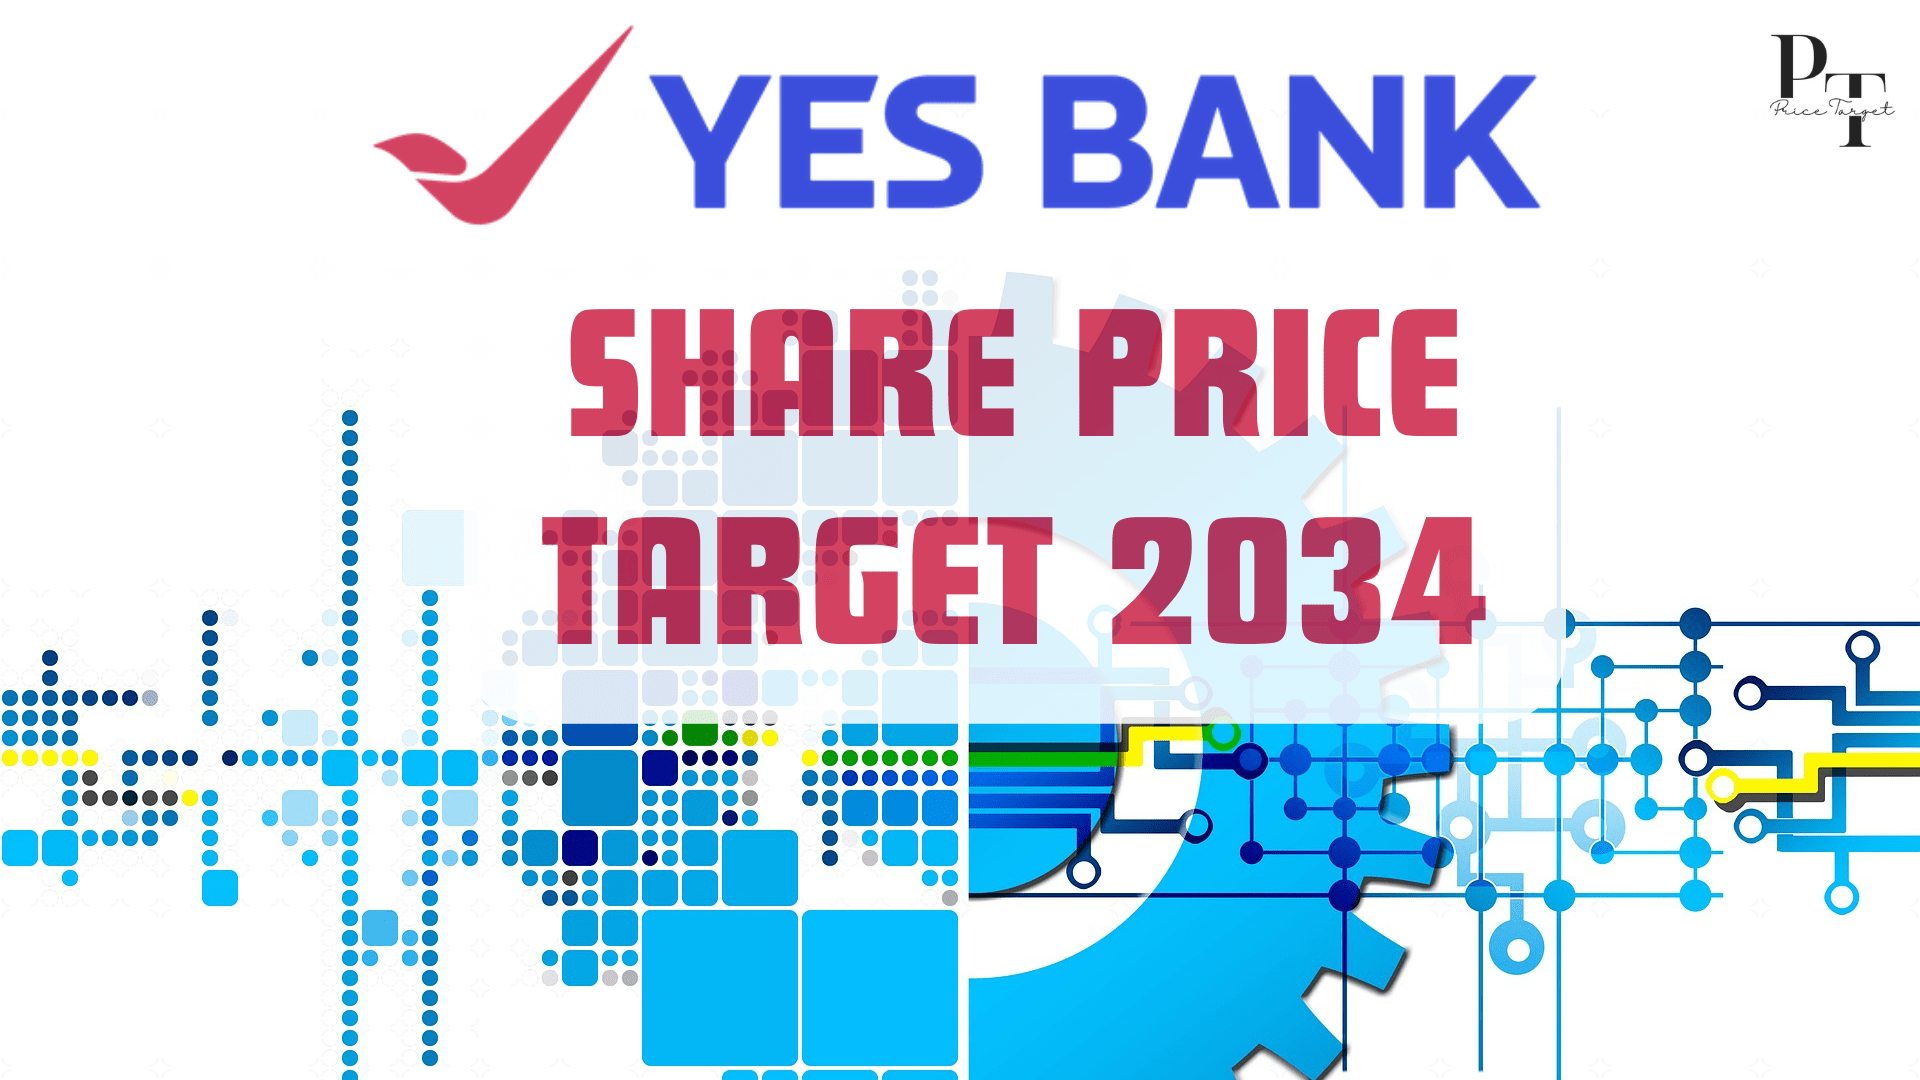 Yes Bank Share Price Target 2034